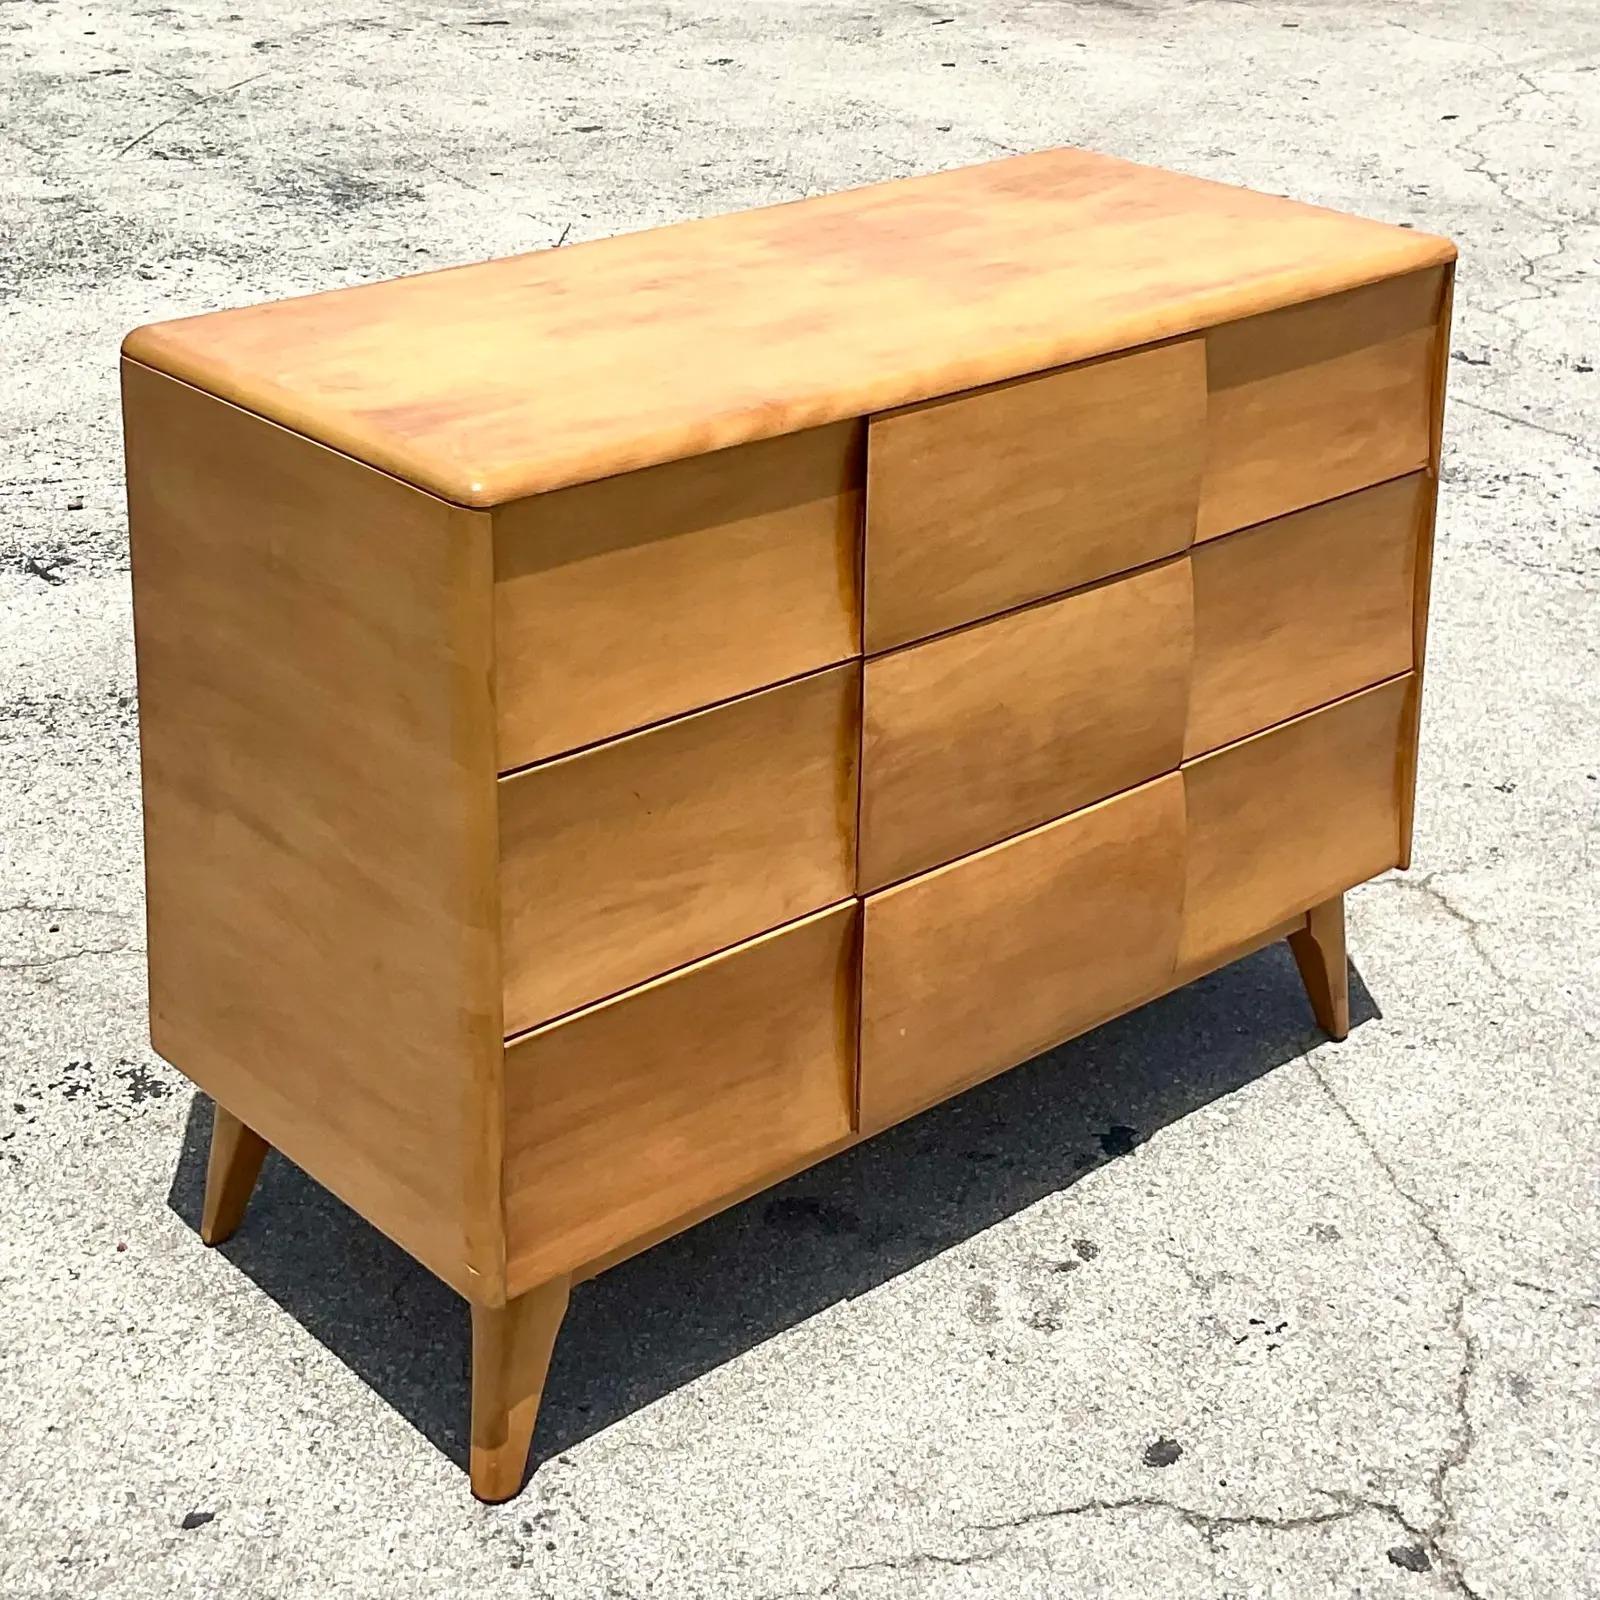 Fantastic vintage Midcentury Kohinooor chest of drawers. Made by the iconic Heywood Wakefield. A chic MCM design in a pale maple wood. A real collectors item. Acquired from a Palm Beach estate.